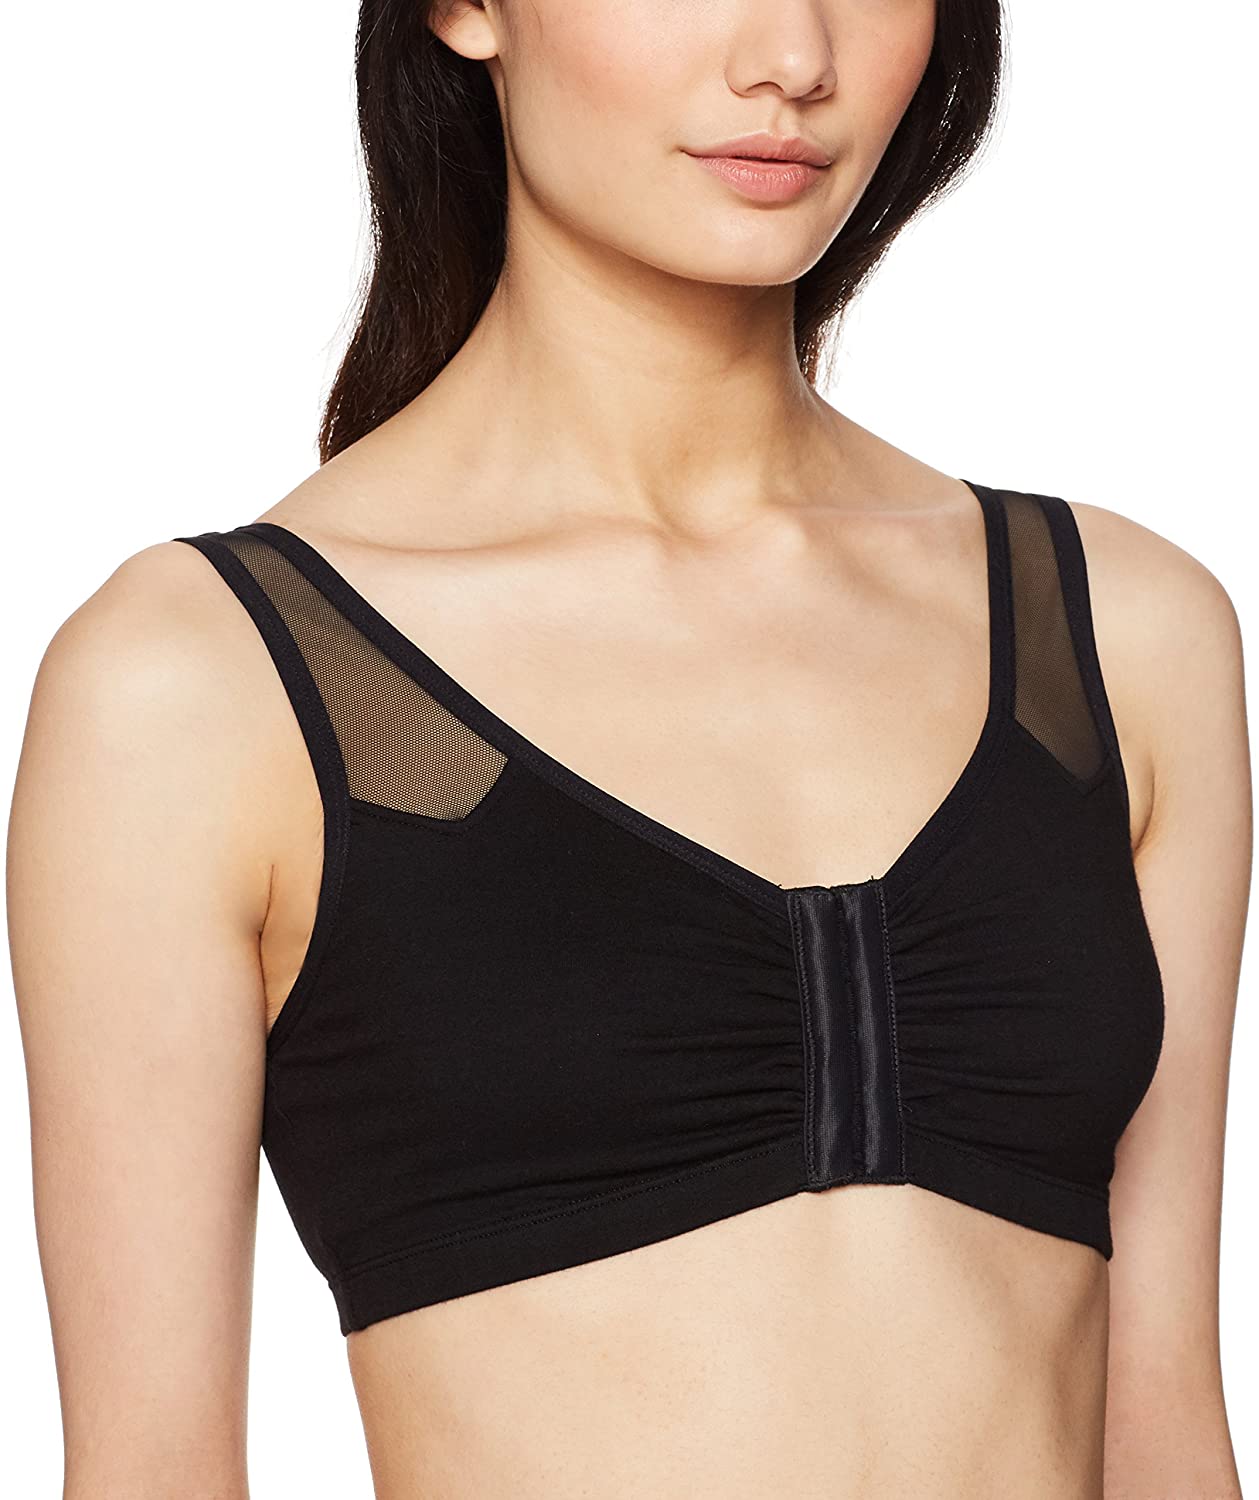 Price:$9.94 Fruit of the Loom Comfort Front Close Sport Bra with Mesh Straps Bra at Amazon Women’s Clothing store